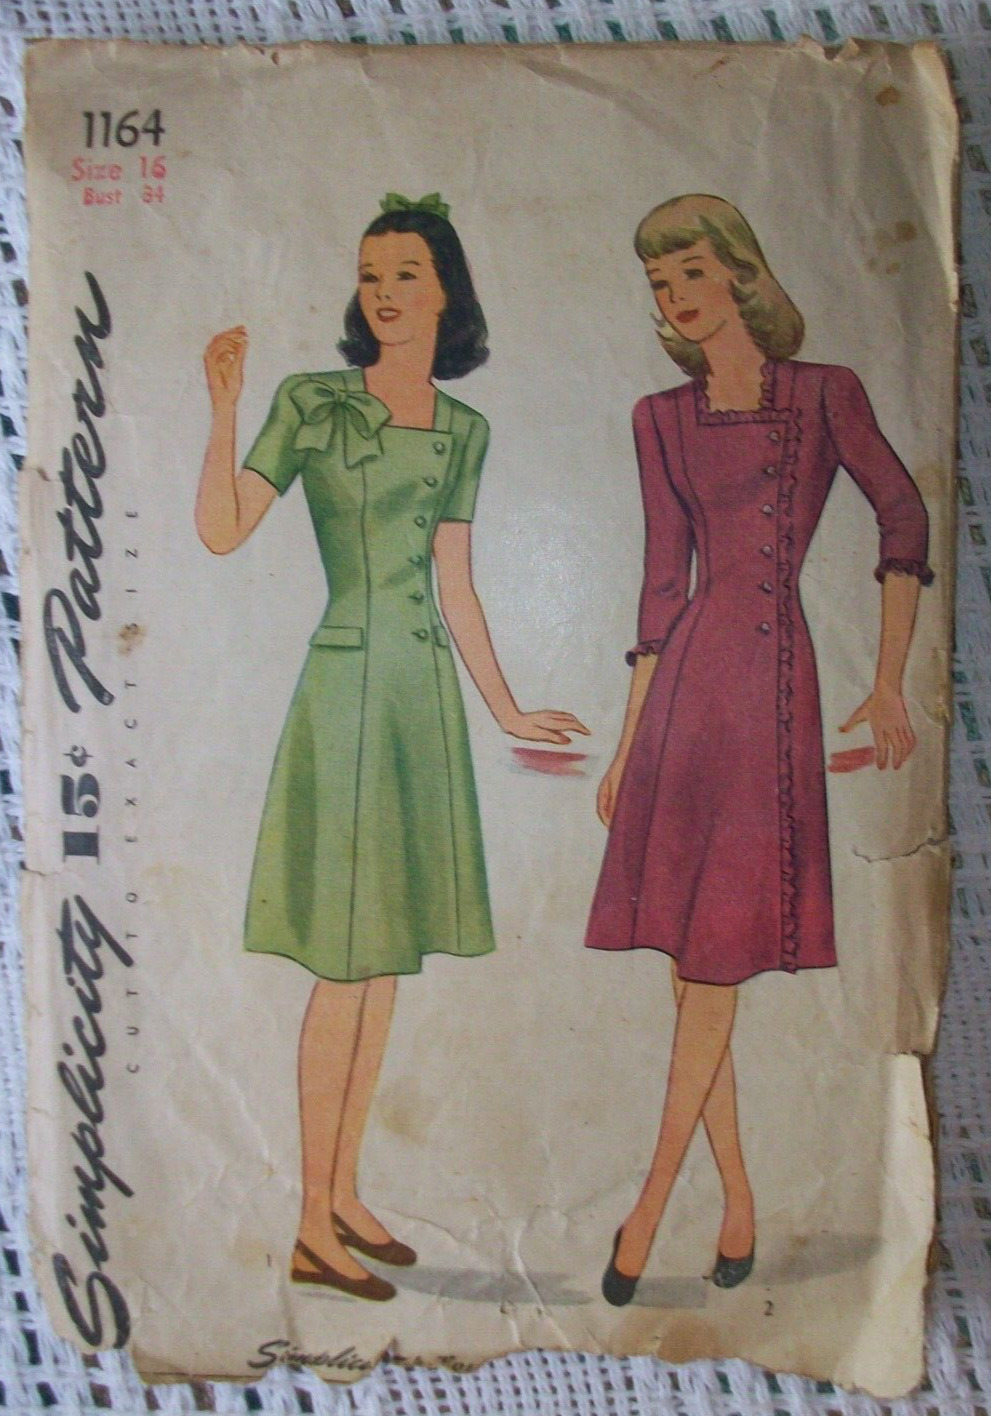 Vintage 40s Simplicity Sewing Pattern 1164 Fitted Gored Teen Dress Size 16